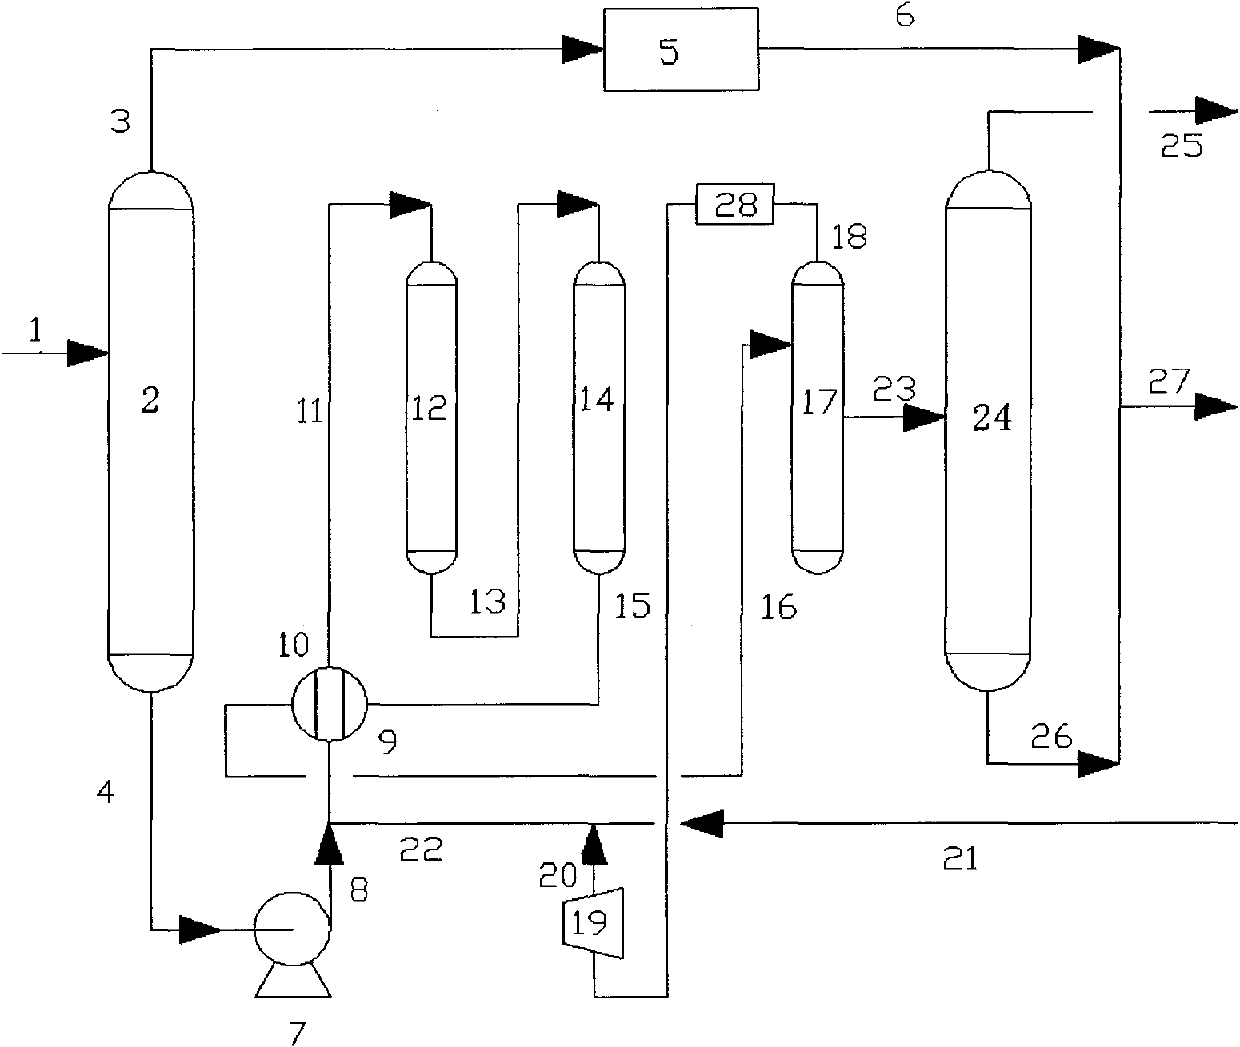 Process method for reducing olefins by hydrogen desulfurization of catalytic gasoline